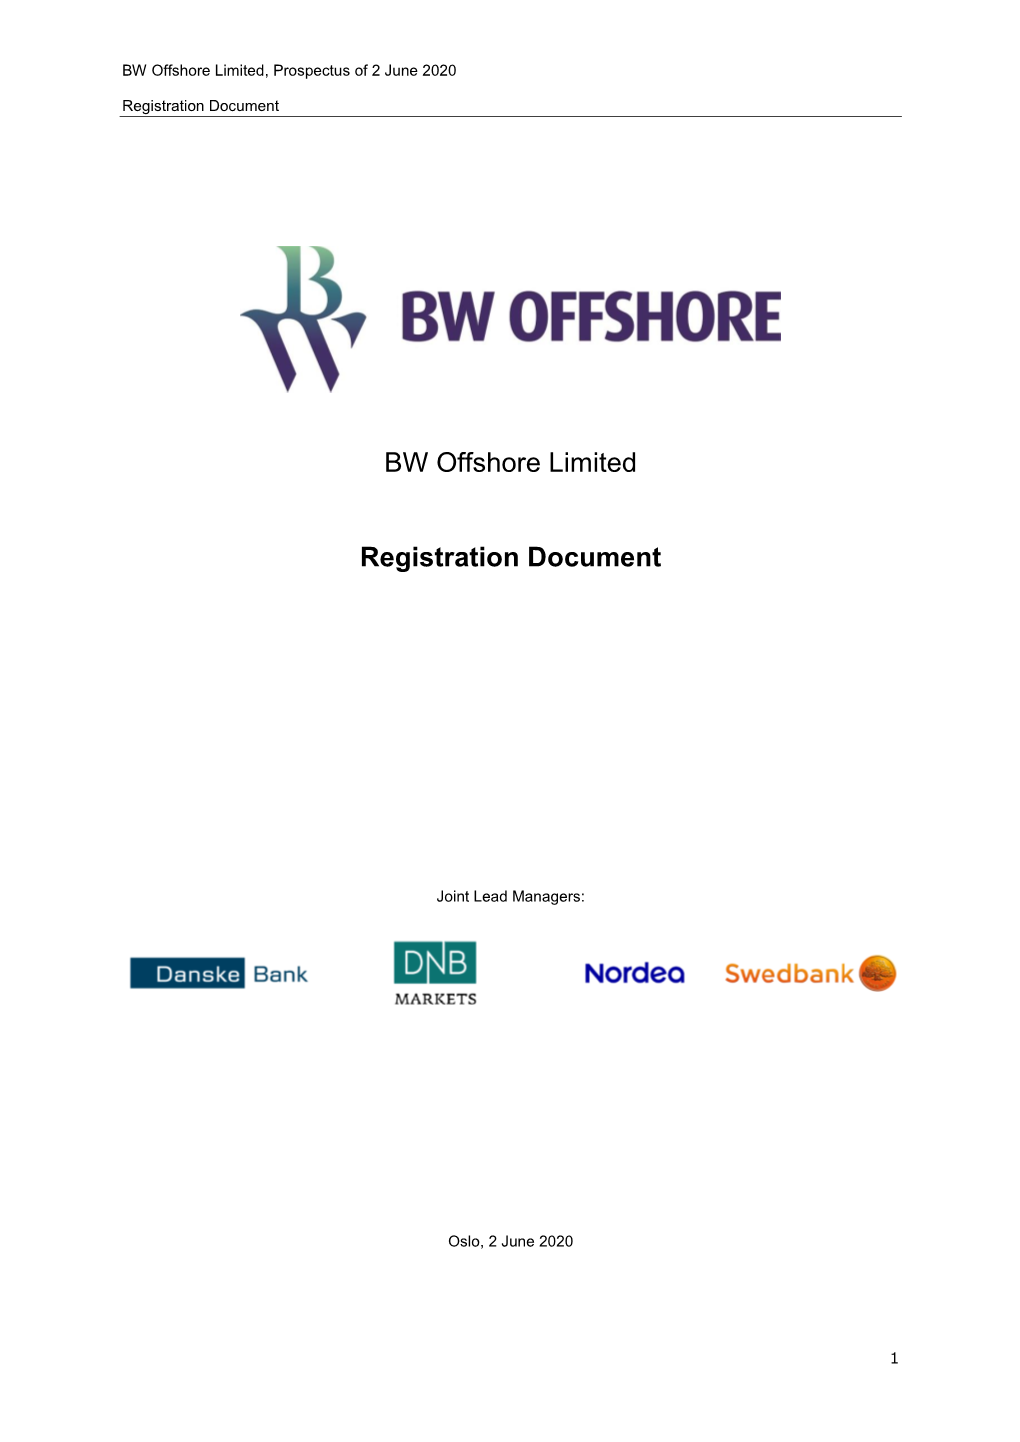 BW Offshore Limited Registration Document